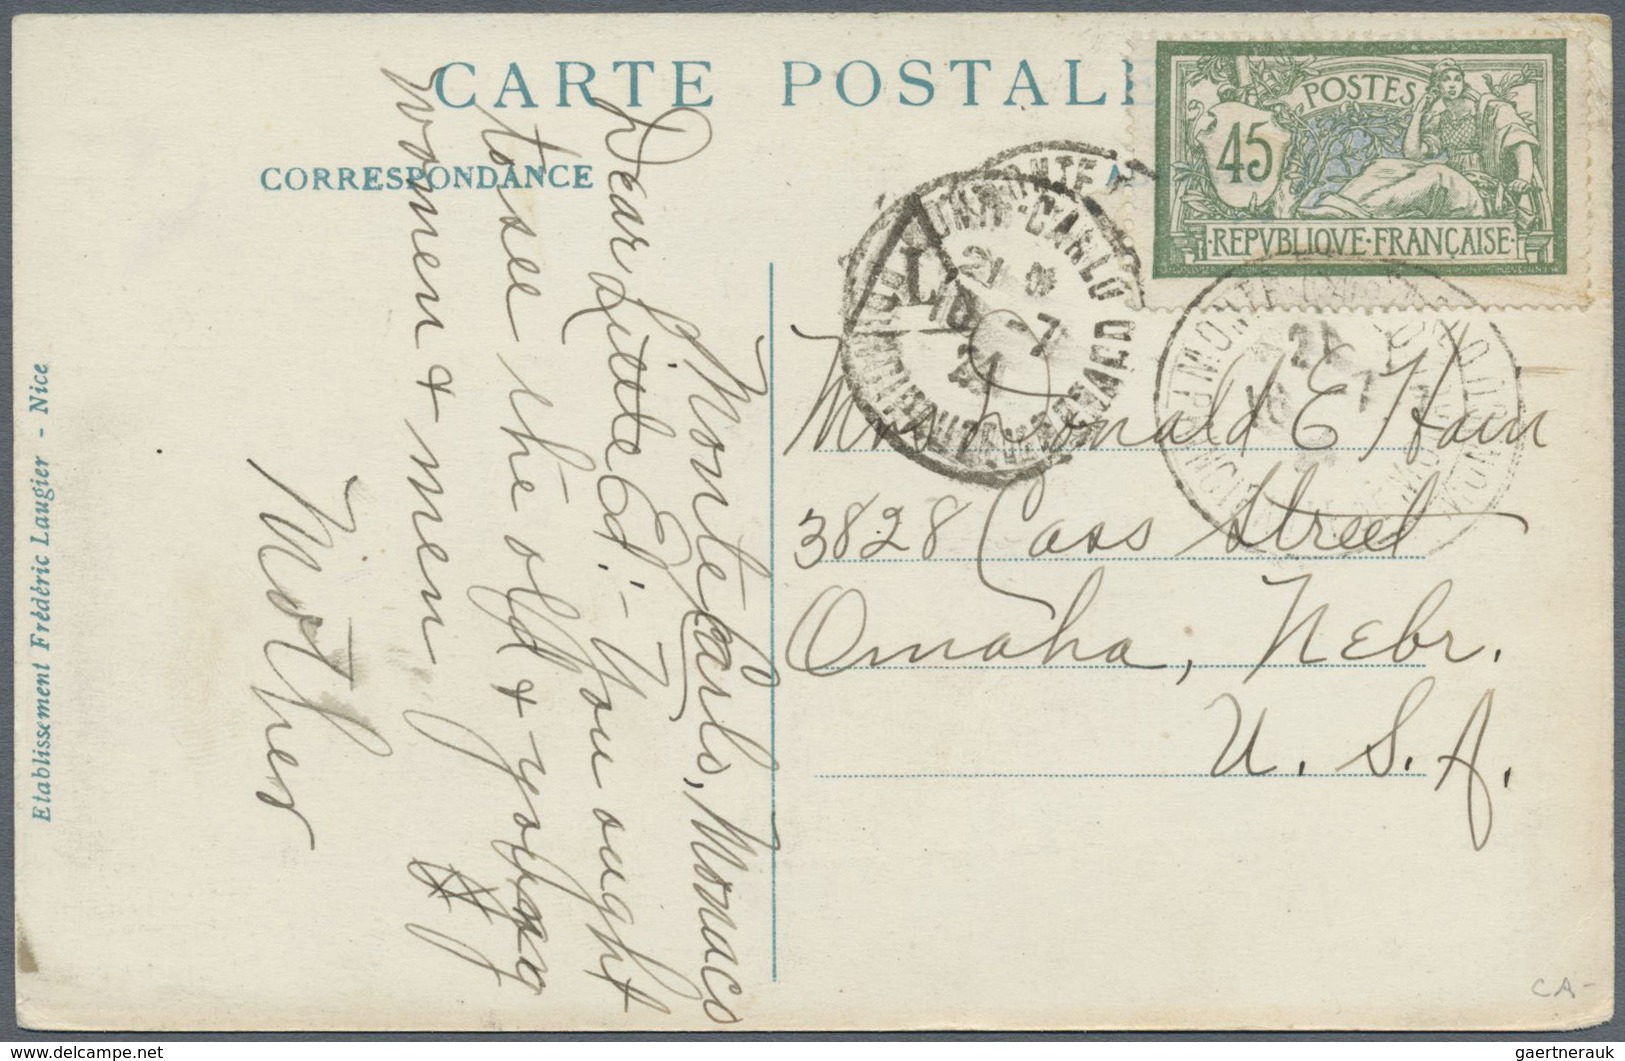 Br Frankreich: 1880/1980 (ca.), Mail to USA, holding of more than 400 (mainly commercial) covers/cards,